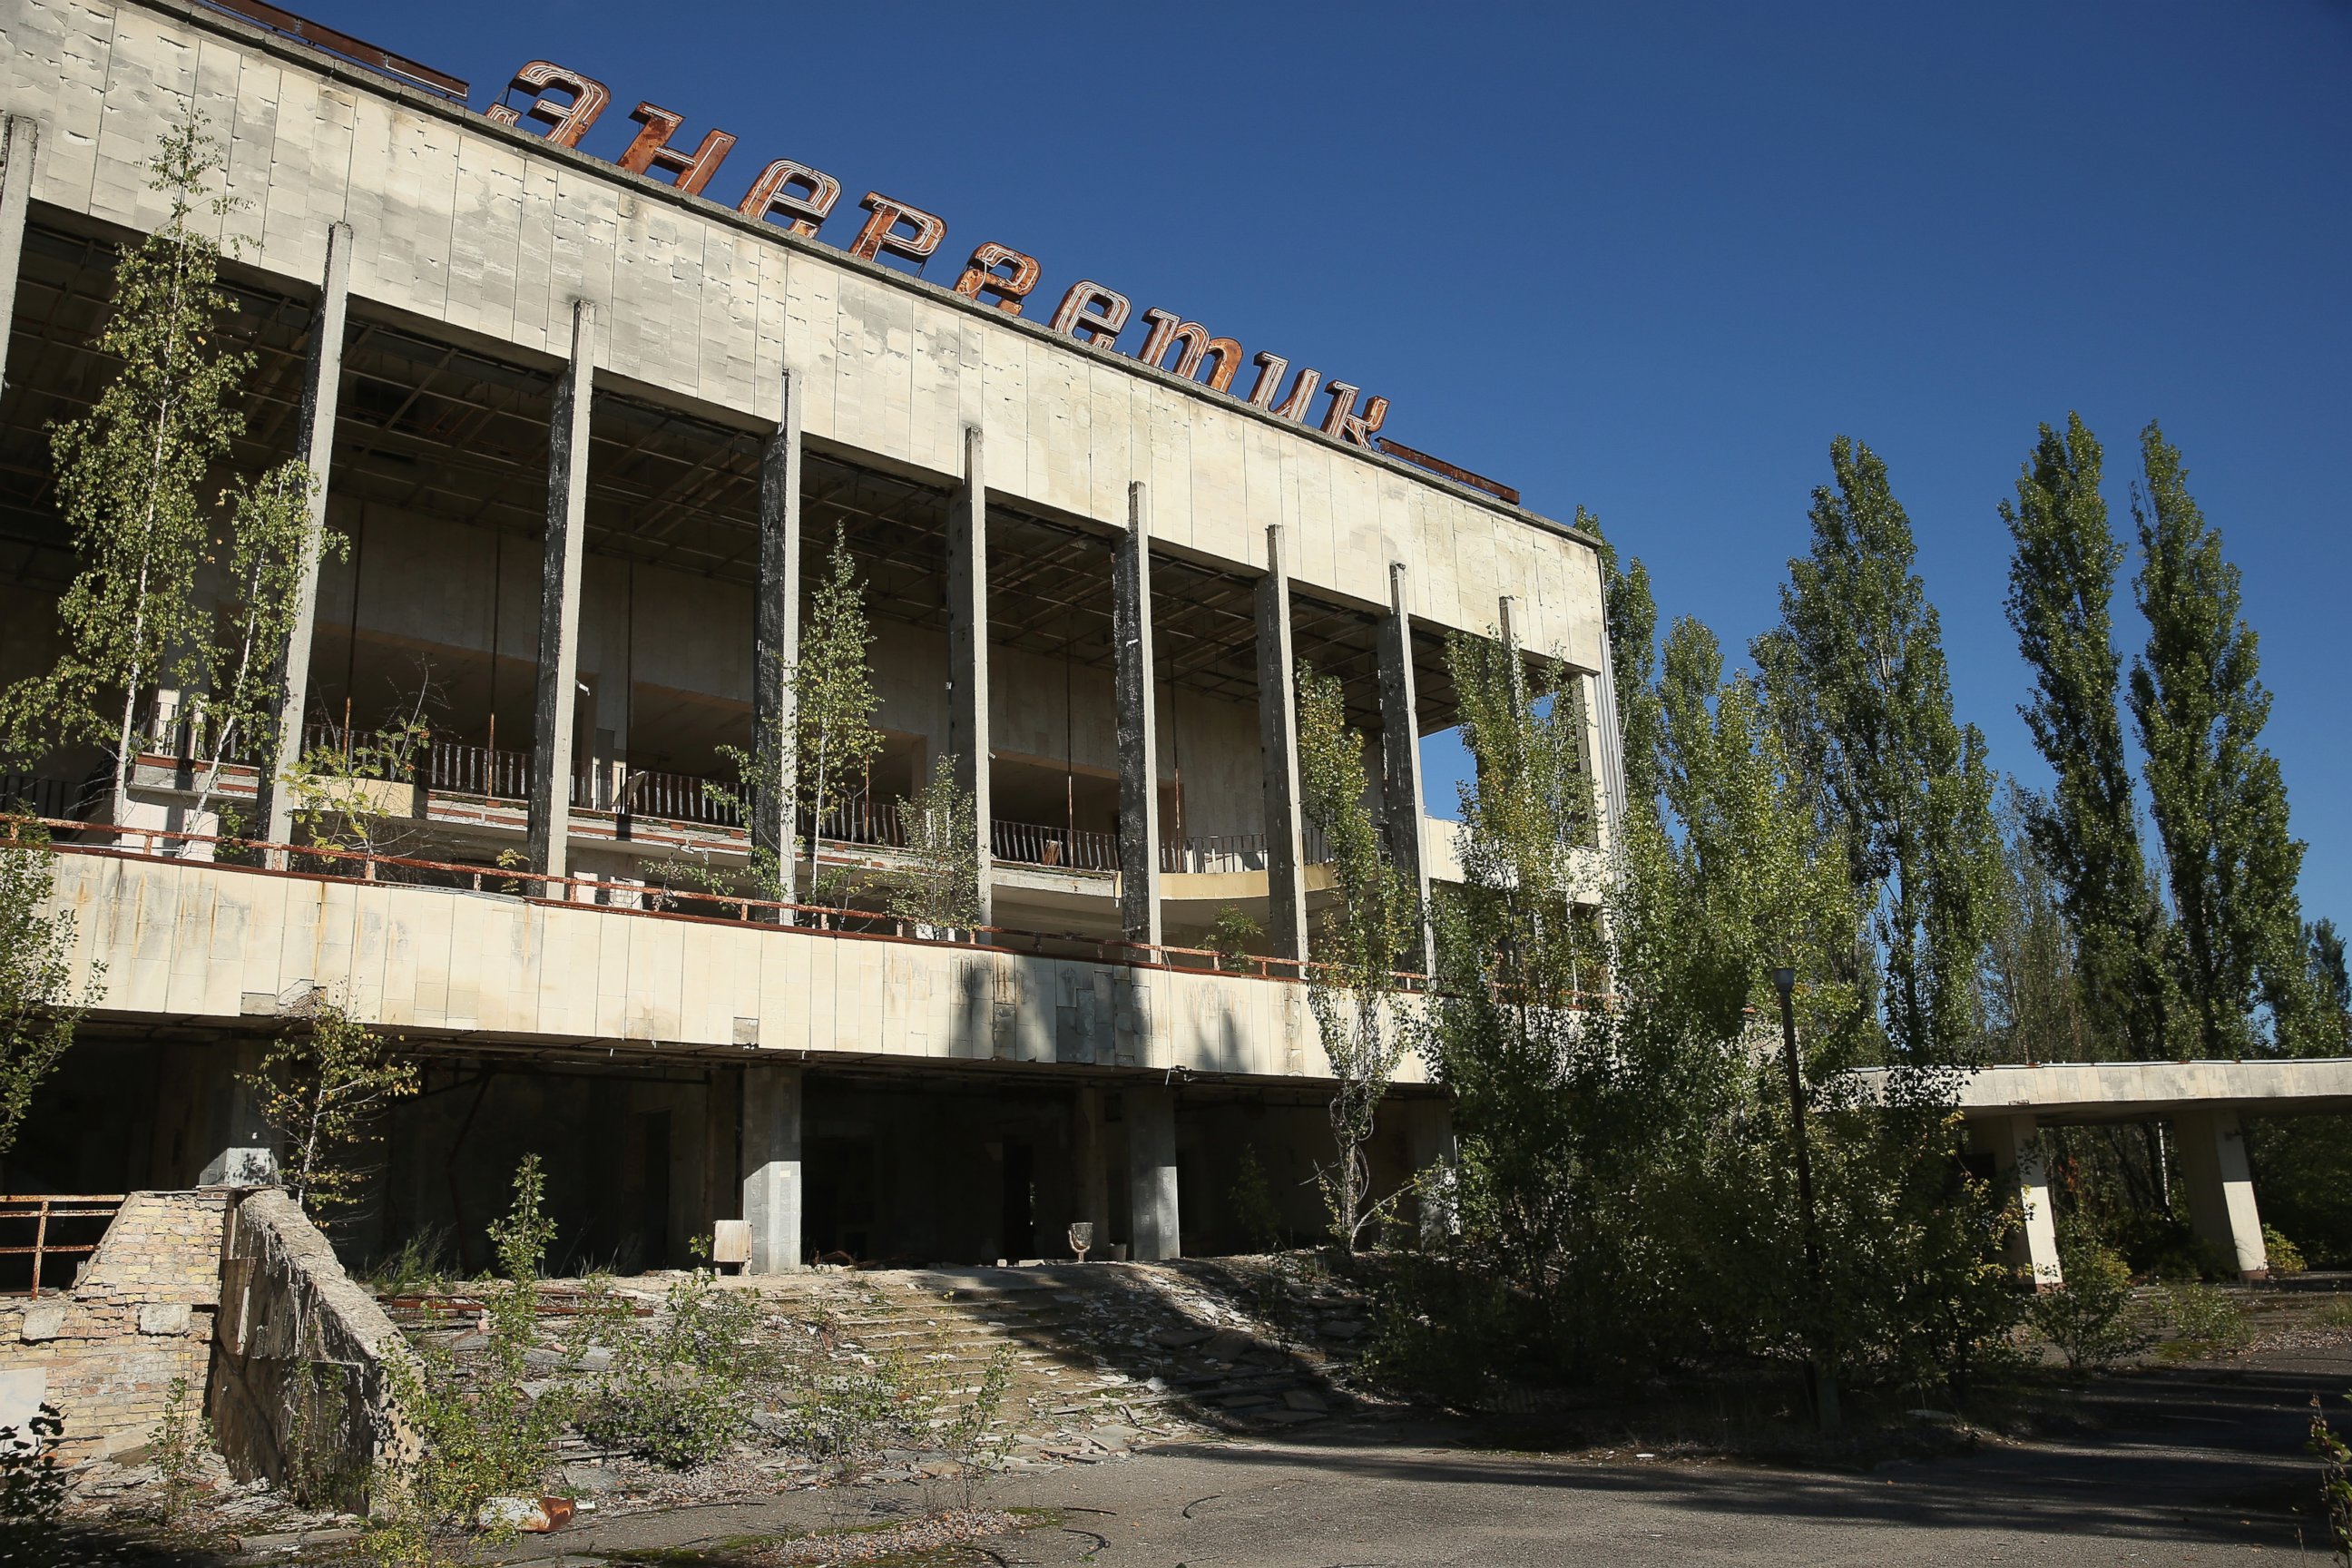 PHOTO: The abandoned "Energetik" cultural center, that once housed a library, lecture halls and sports facilities, stands on the former main square overgrown with trees, Sept. 30, 2015 in Pripyat, Ukraine.